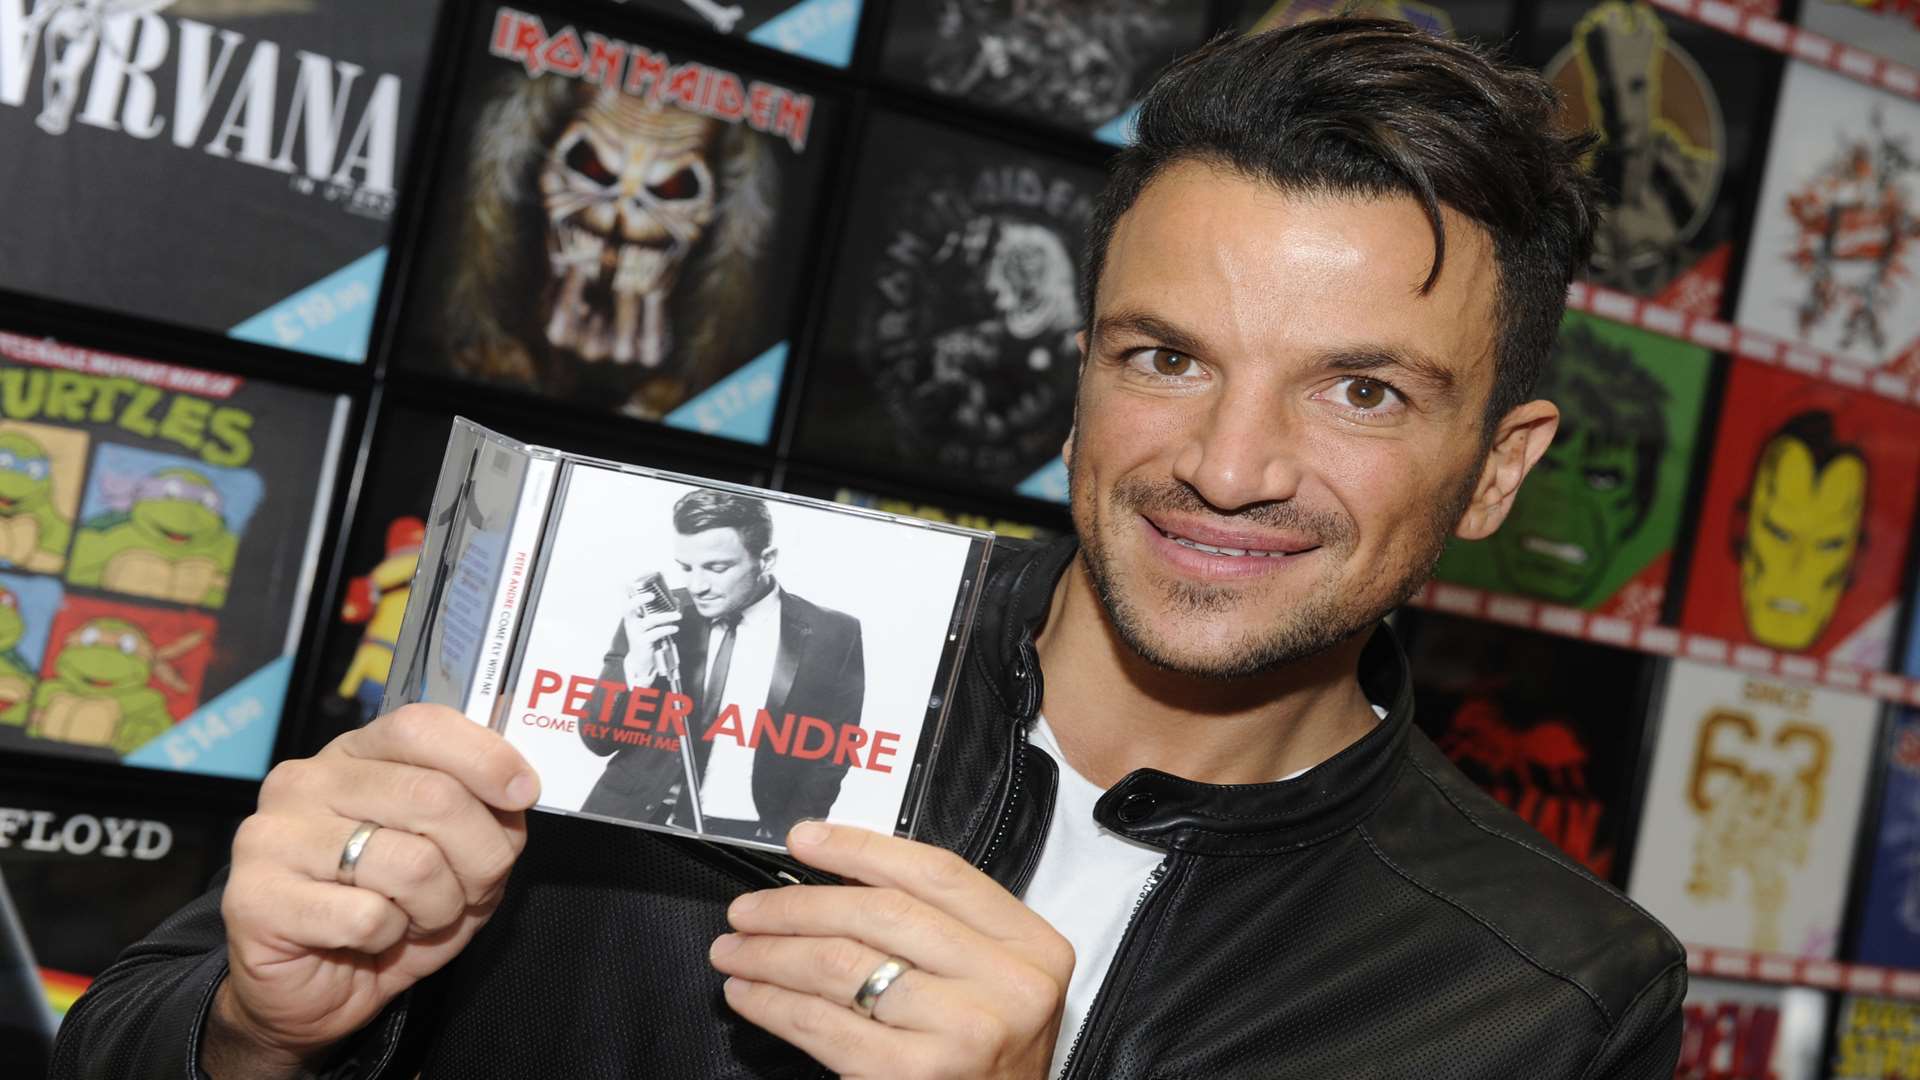 Peter Andre arrives to sign copies of his new album Come Fly With Me.